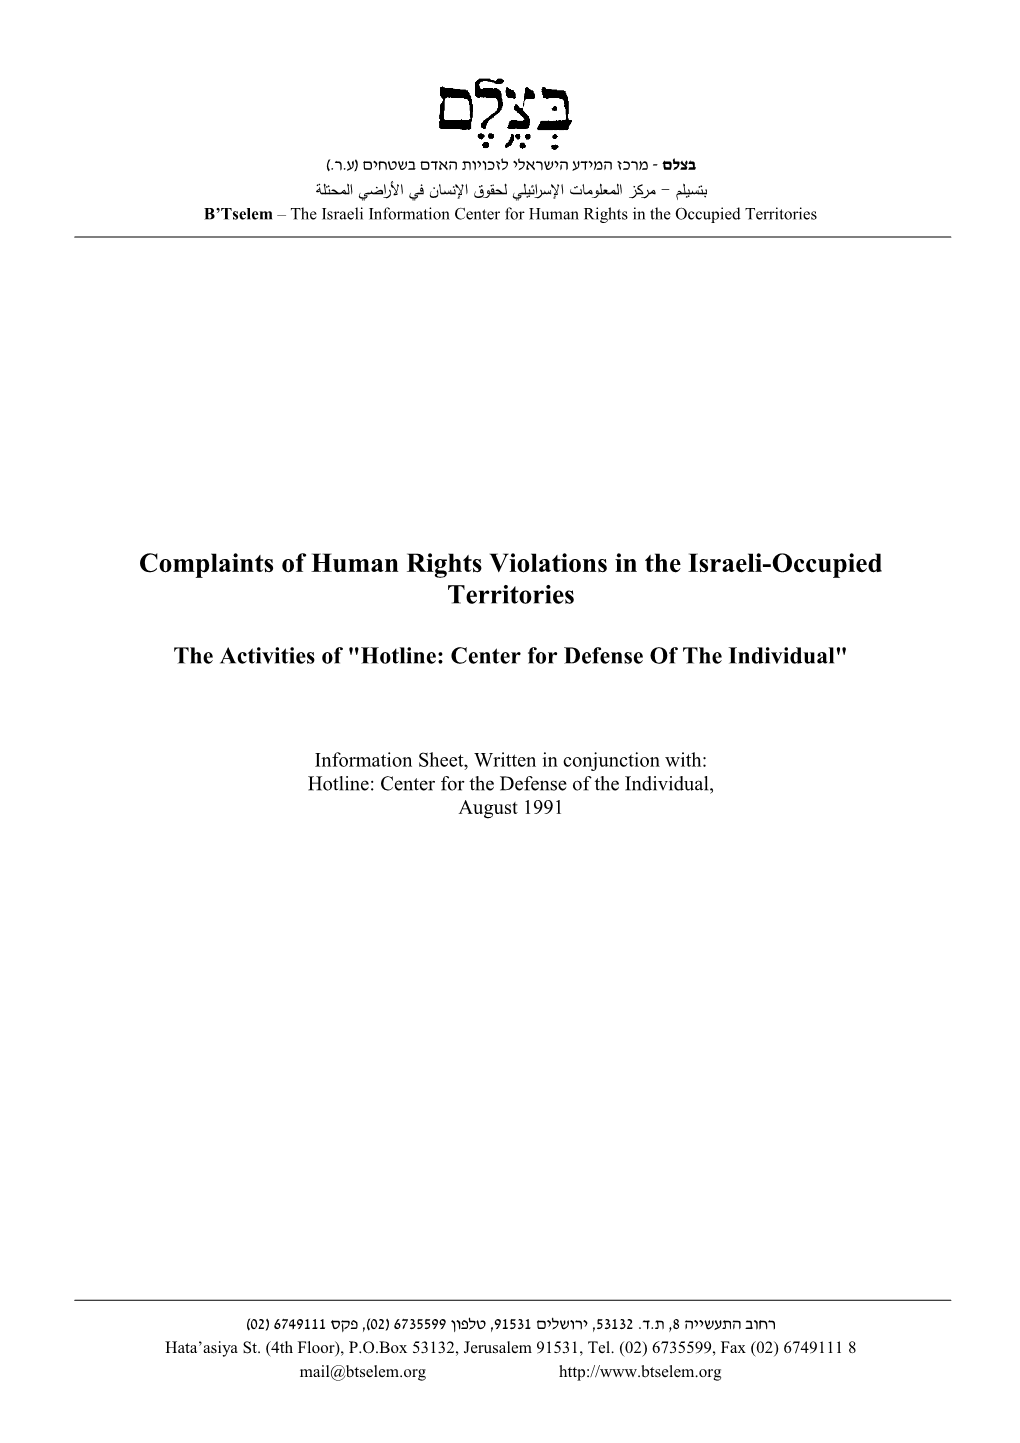 B'tselem Report: Complaints of Human Rights Violations in the Israeli-Occupied Territories